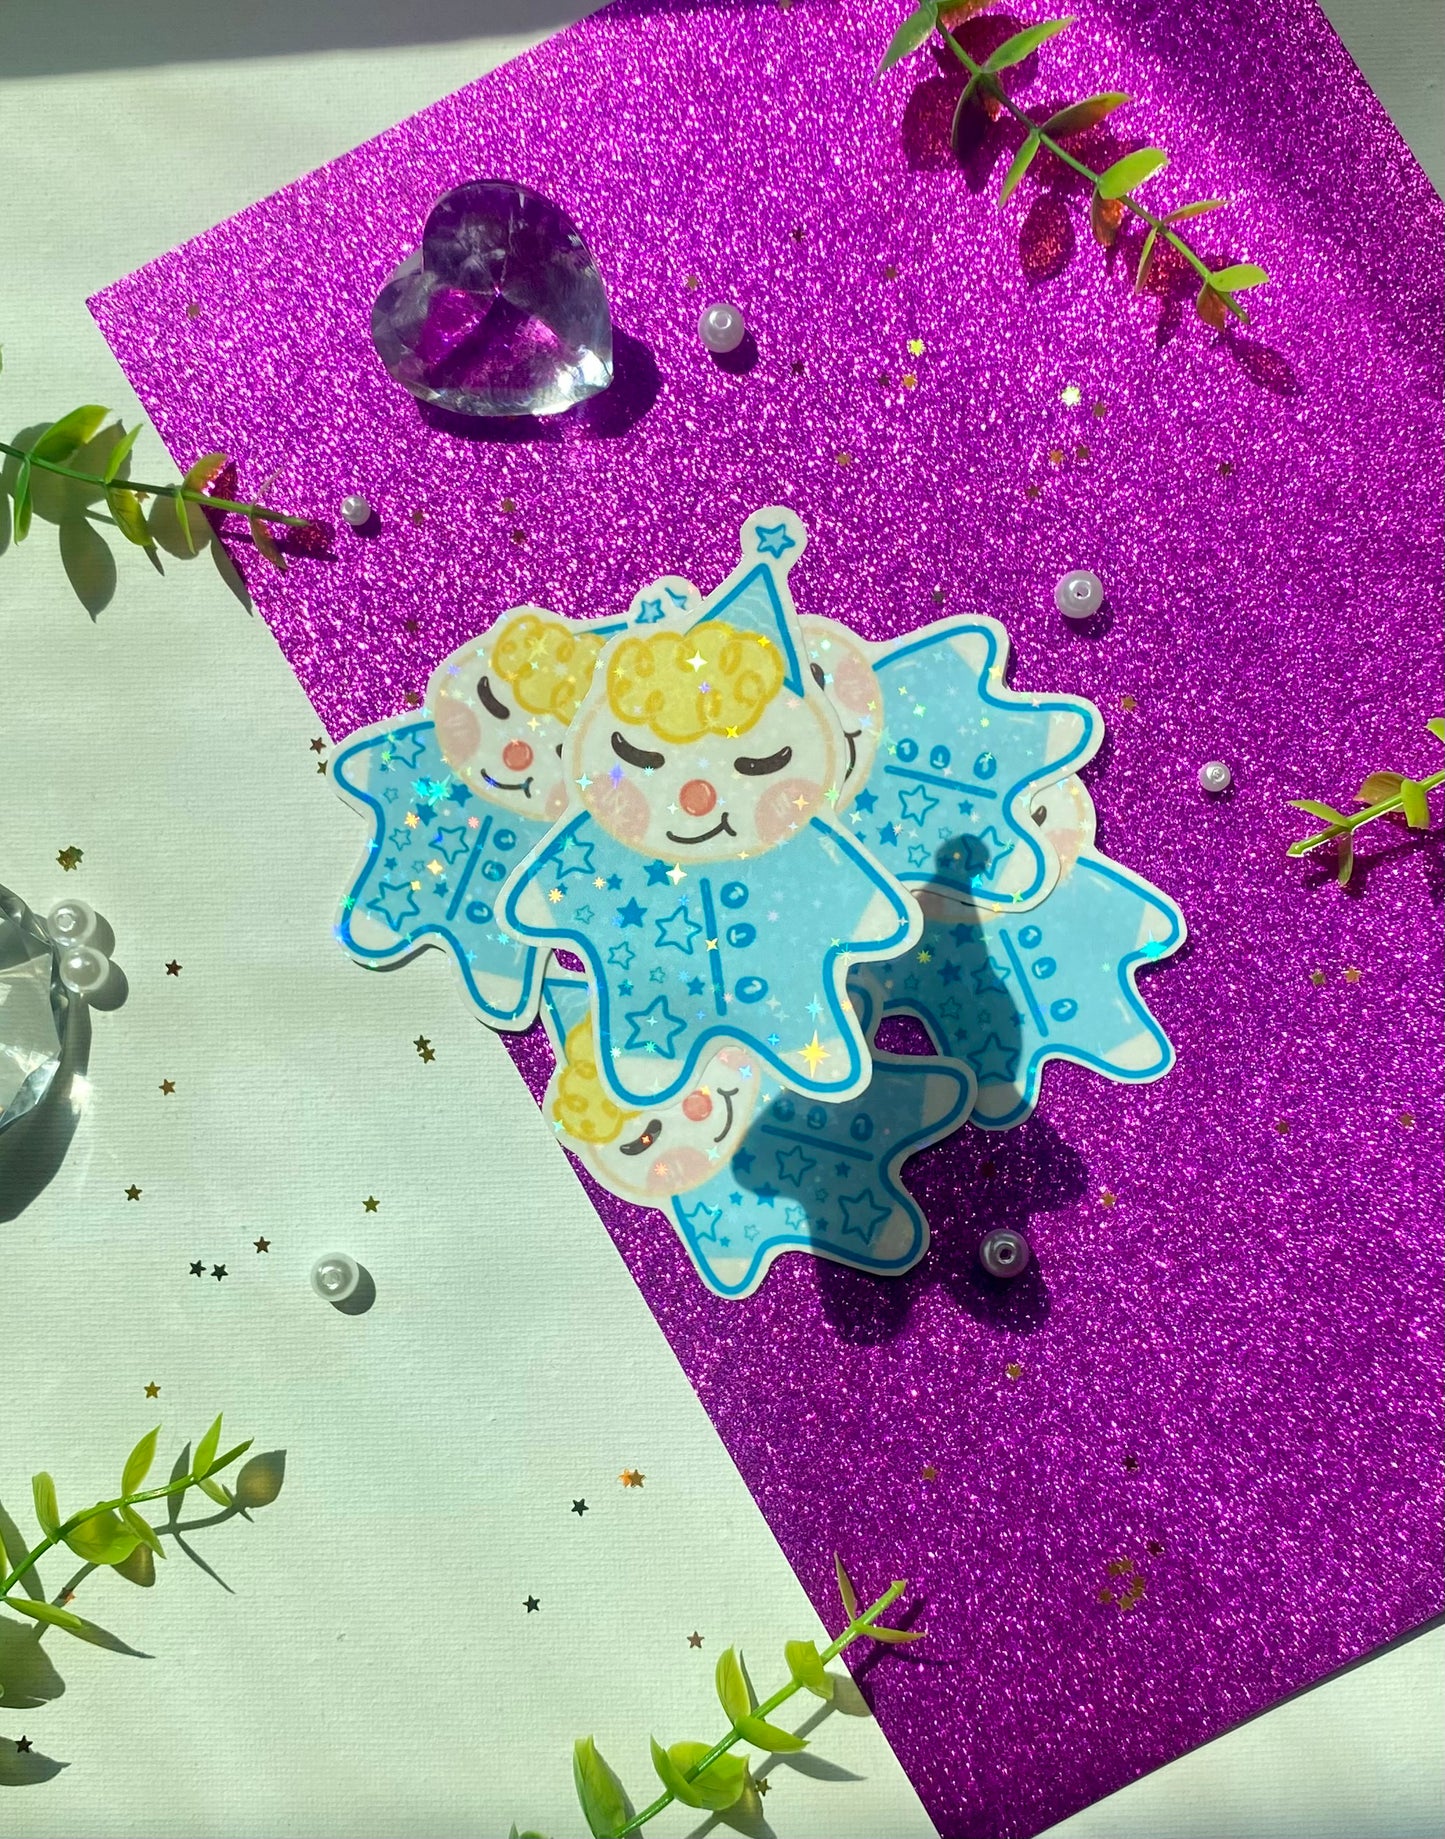 Holographic Bedtime Sticker